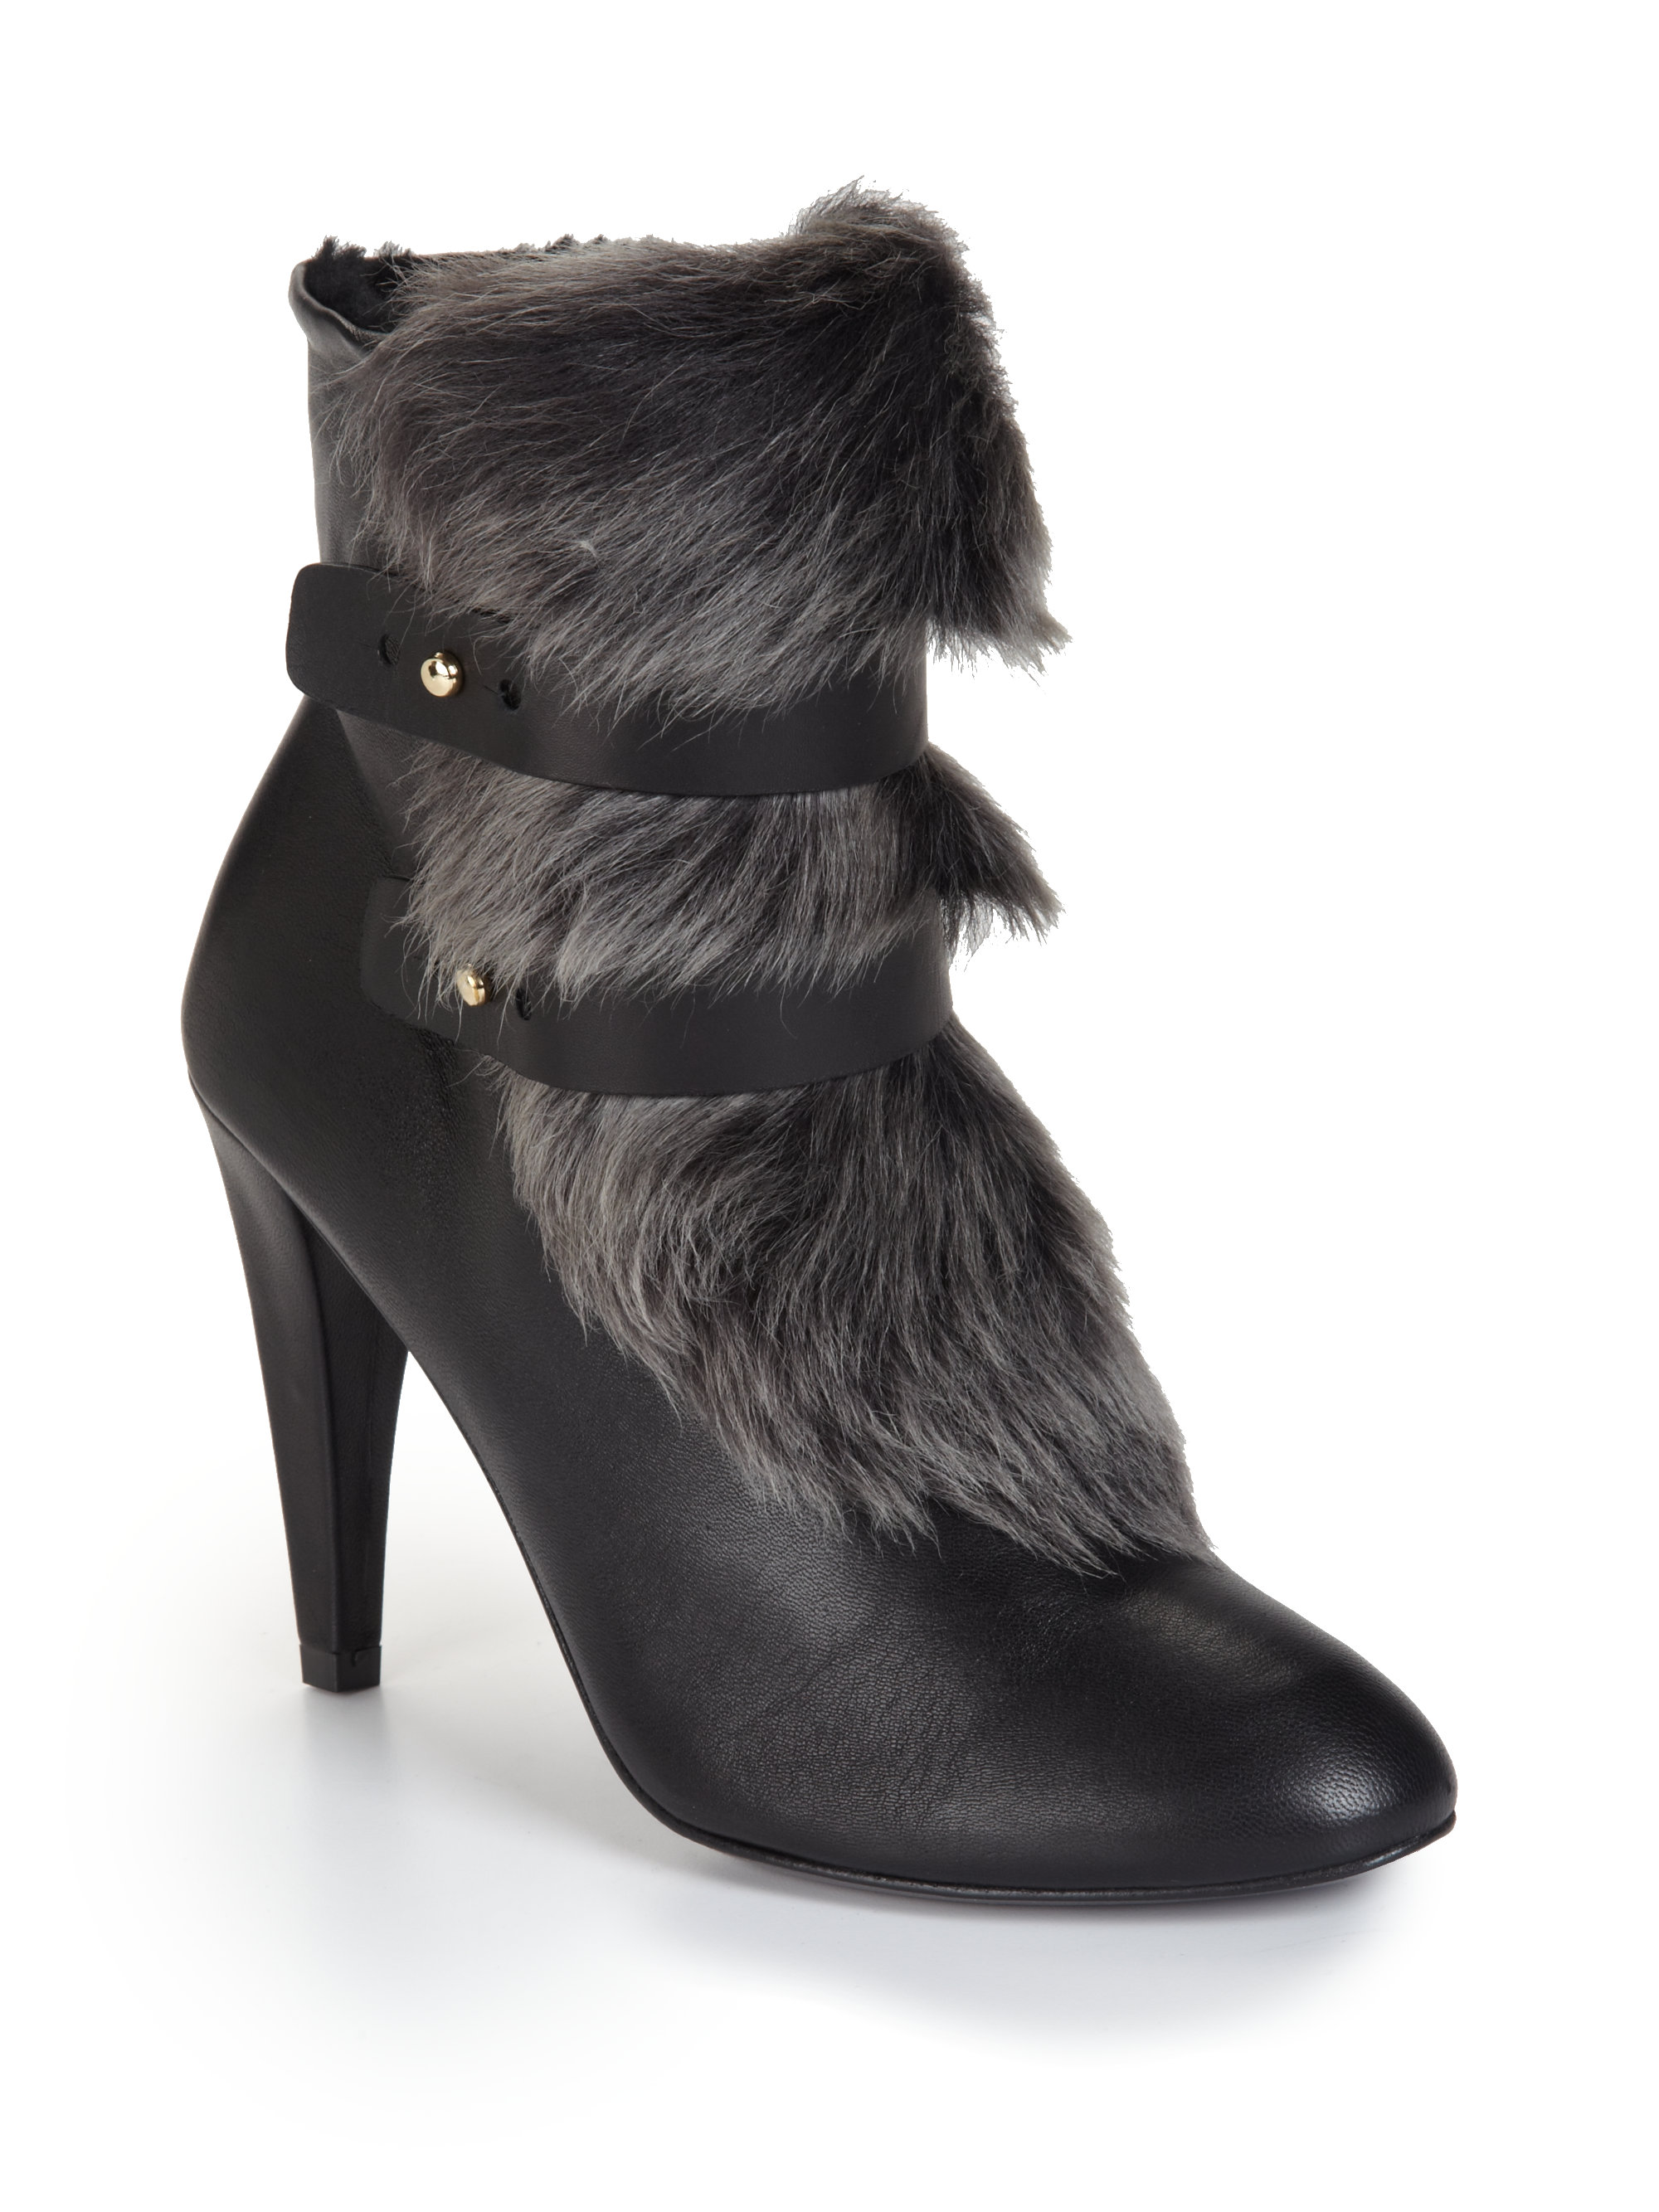 Lyst - Rebecca Minkoff Short Faux Fur Ankle Boots in Black